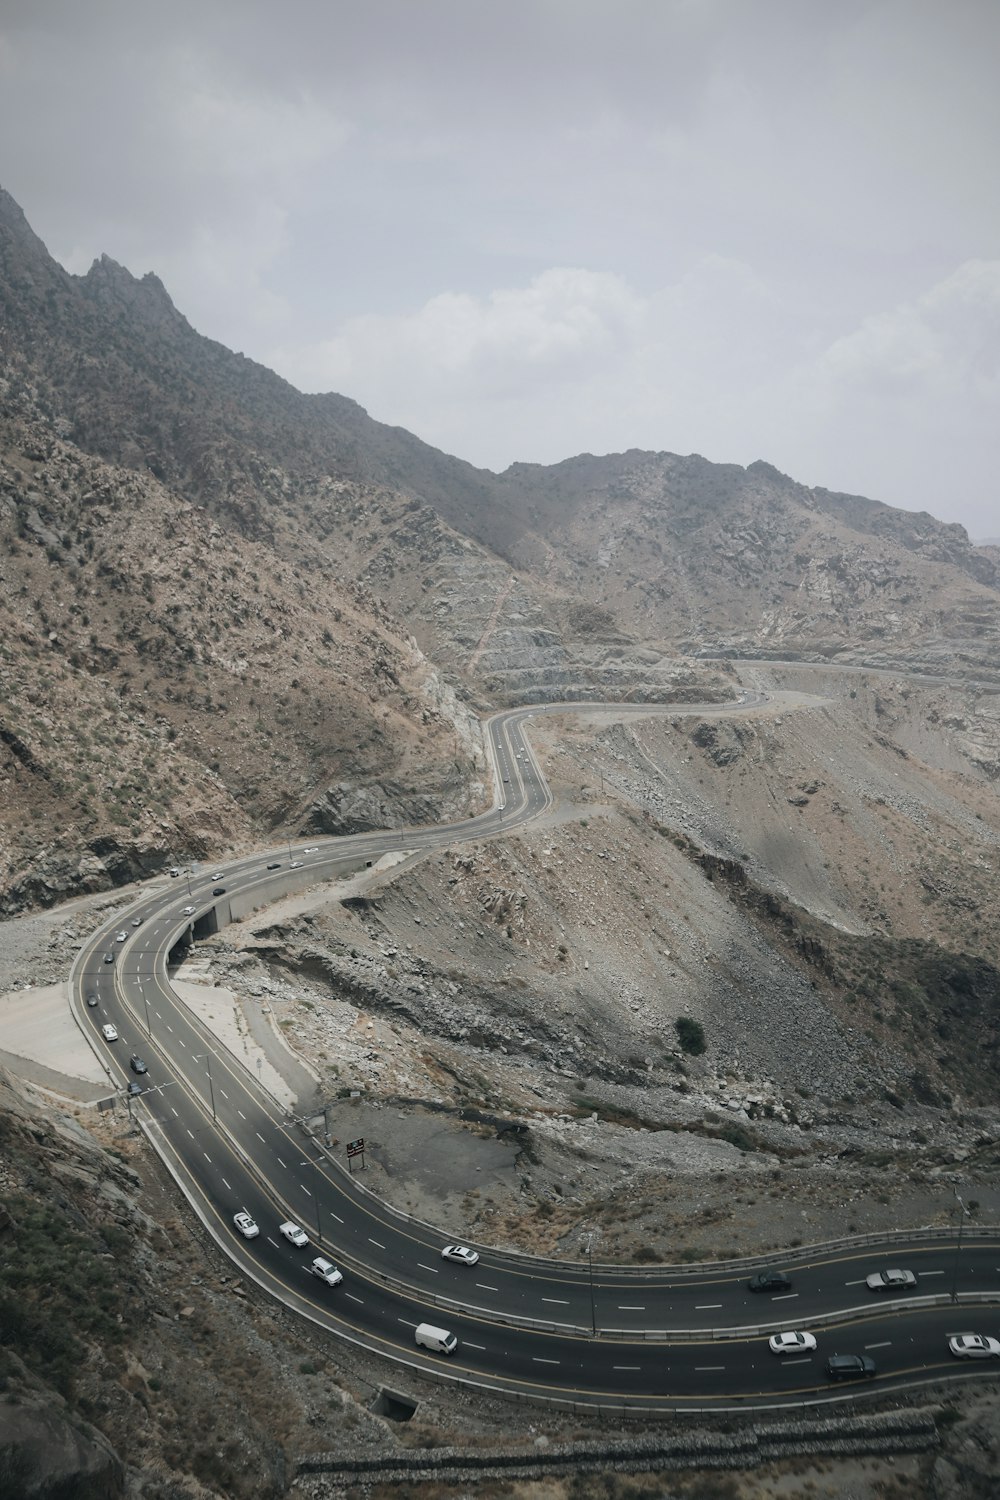 a view of a highway in the middle of a mountainous area